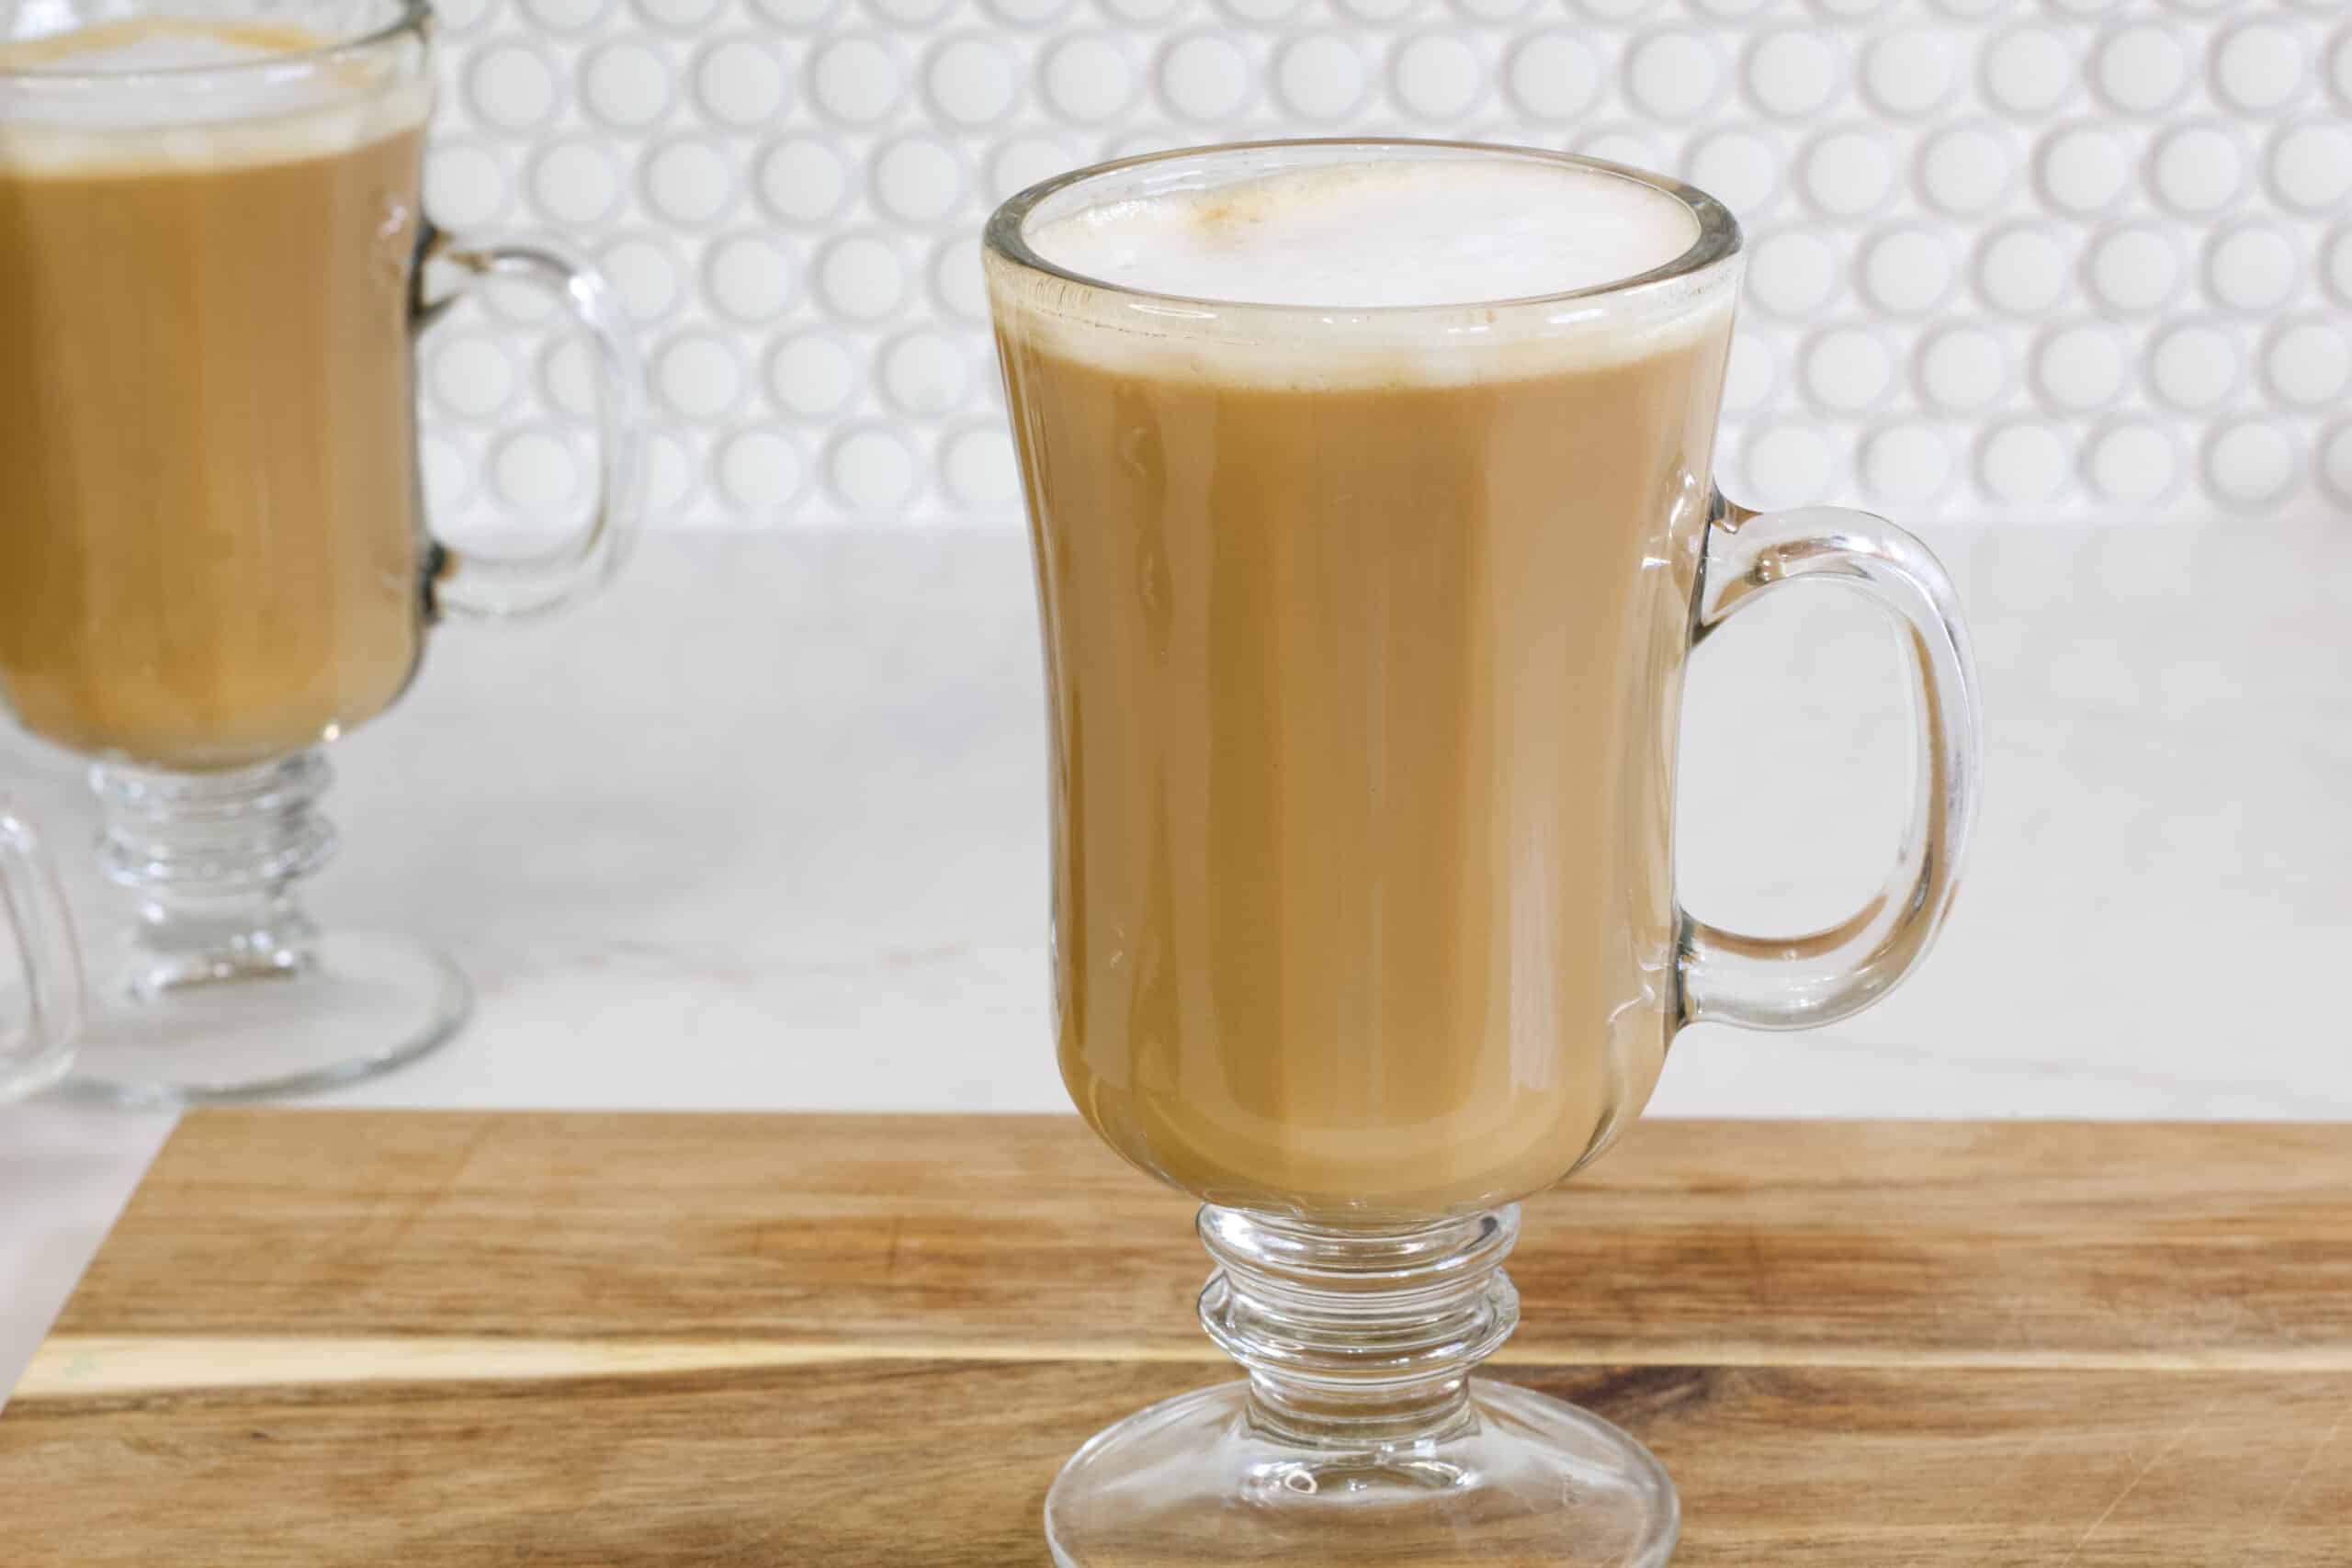 https://www.mindyscookingobsession.com/wp-content/uploads/2023/03/maple-syrup-coffee-recipe-hot-or-iced-4-scaled.jpg